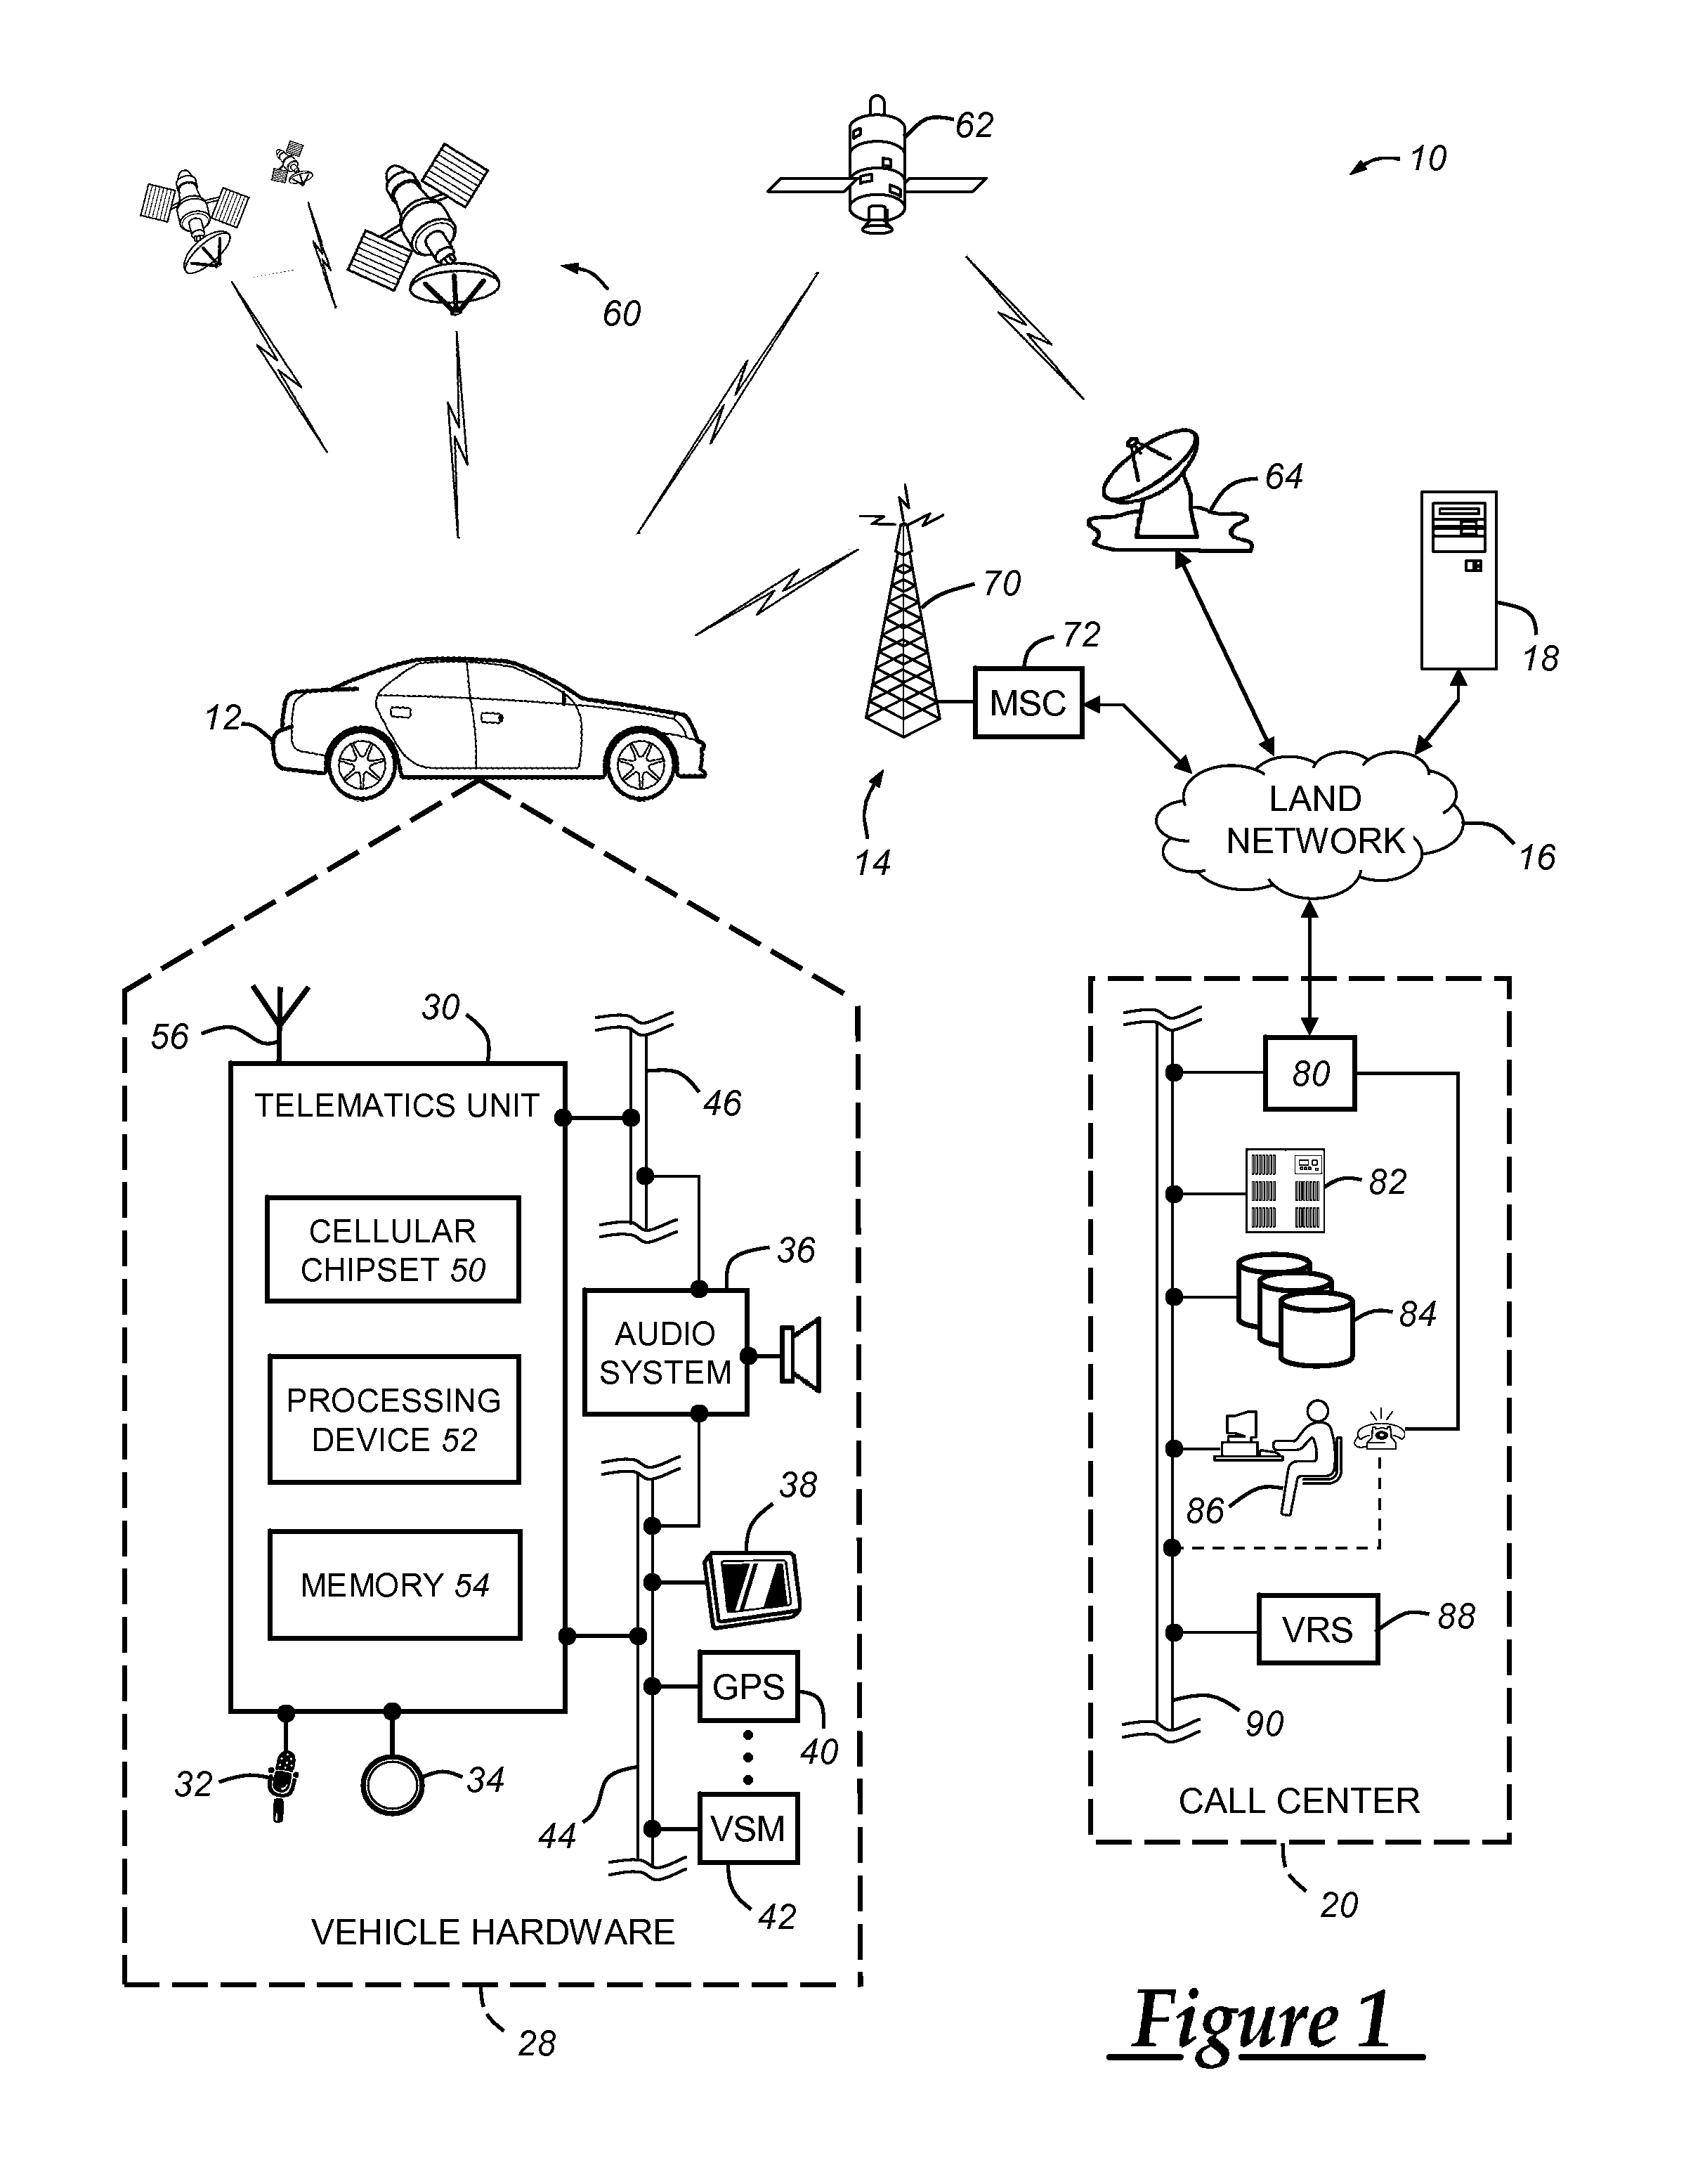 Method of using microphone characteristics to optimize speech recognition performance